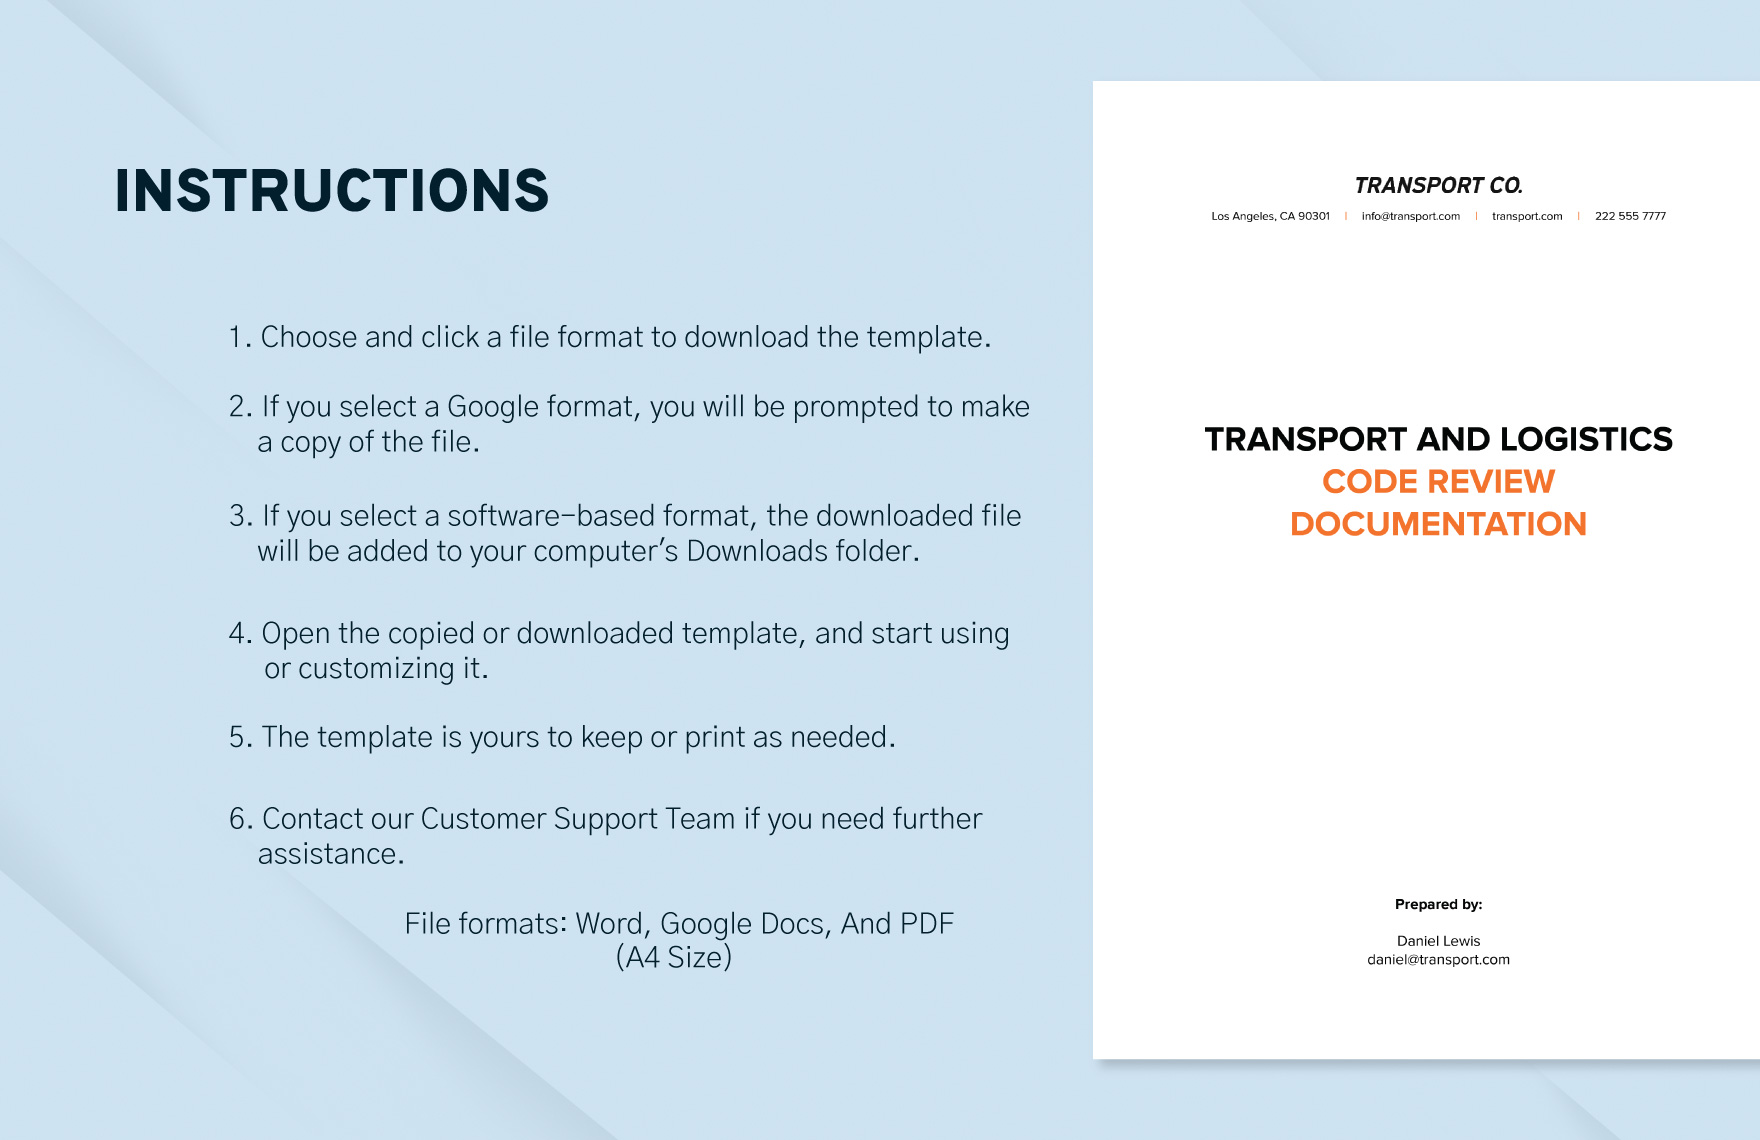 Transport and Logistics Code Review Documentation Template